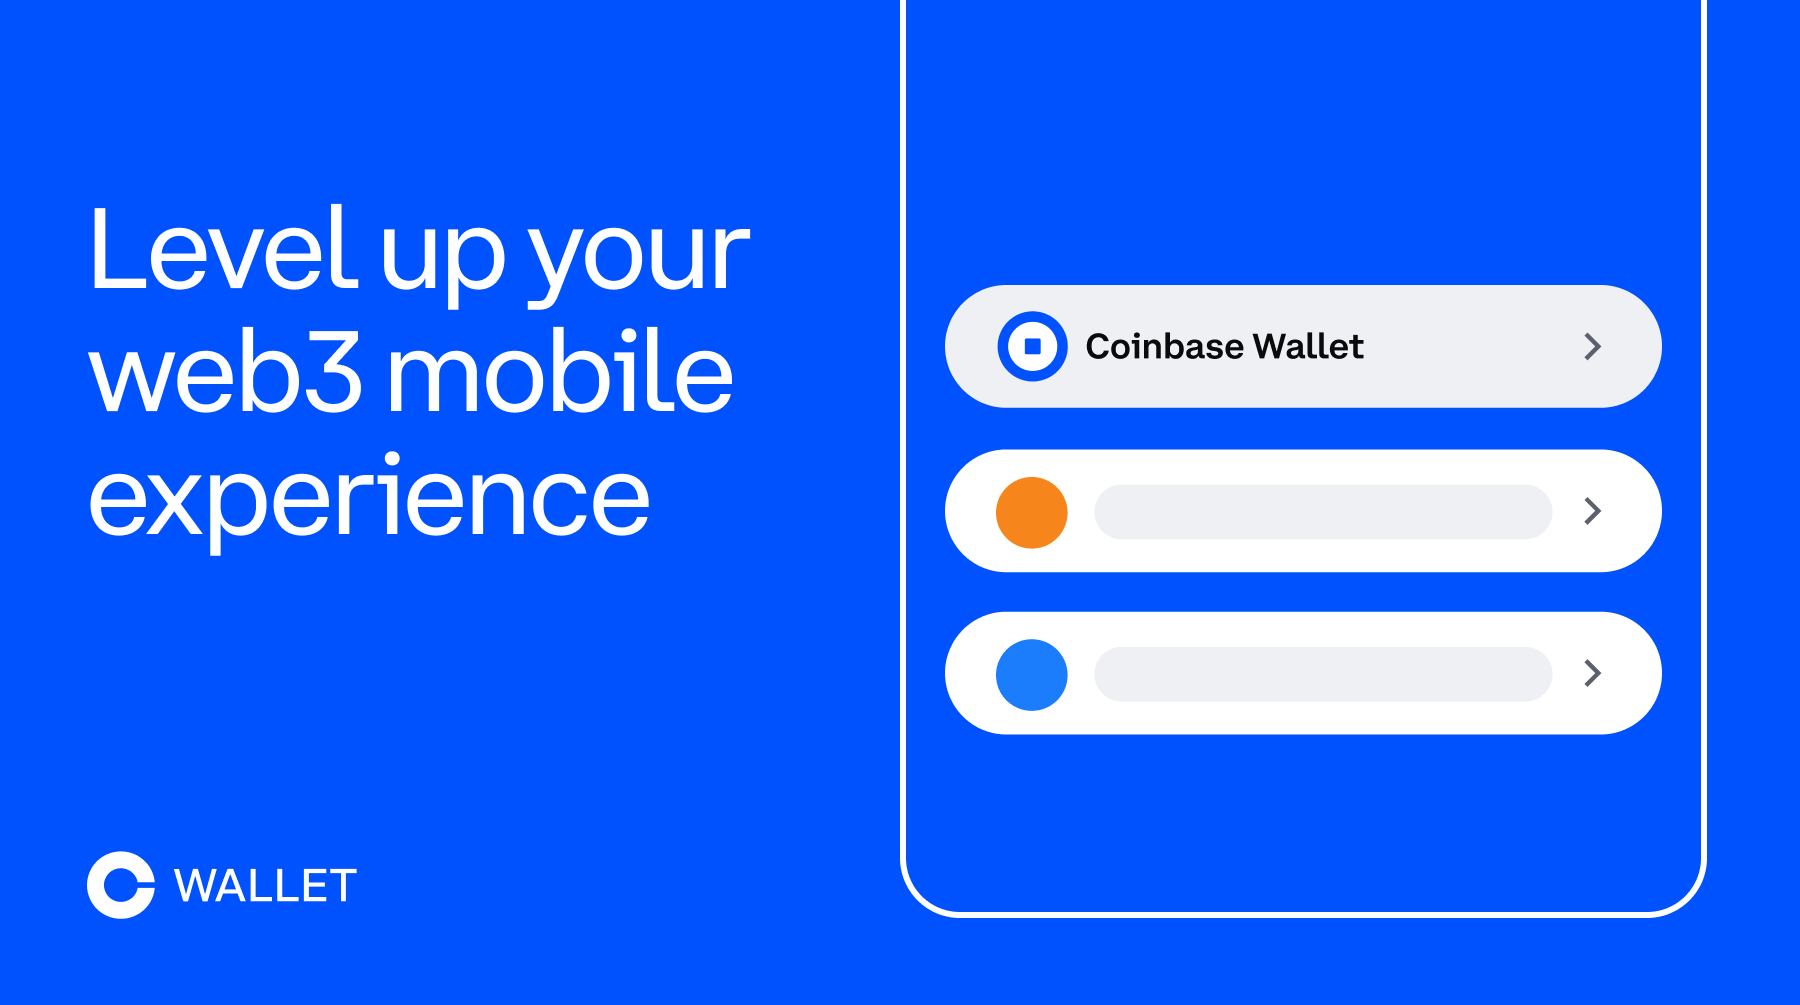 Announcing the Coinbase Wallet Mobile SDK for web3 mobile builders